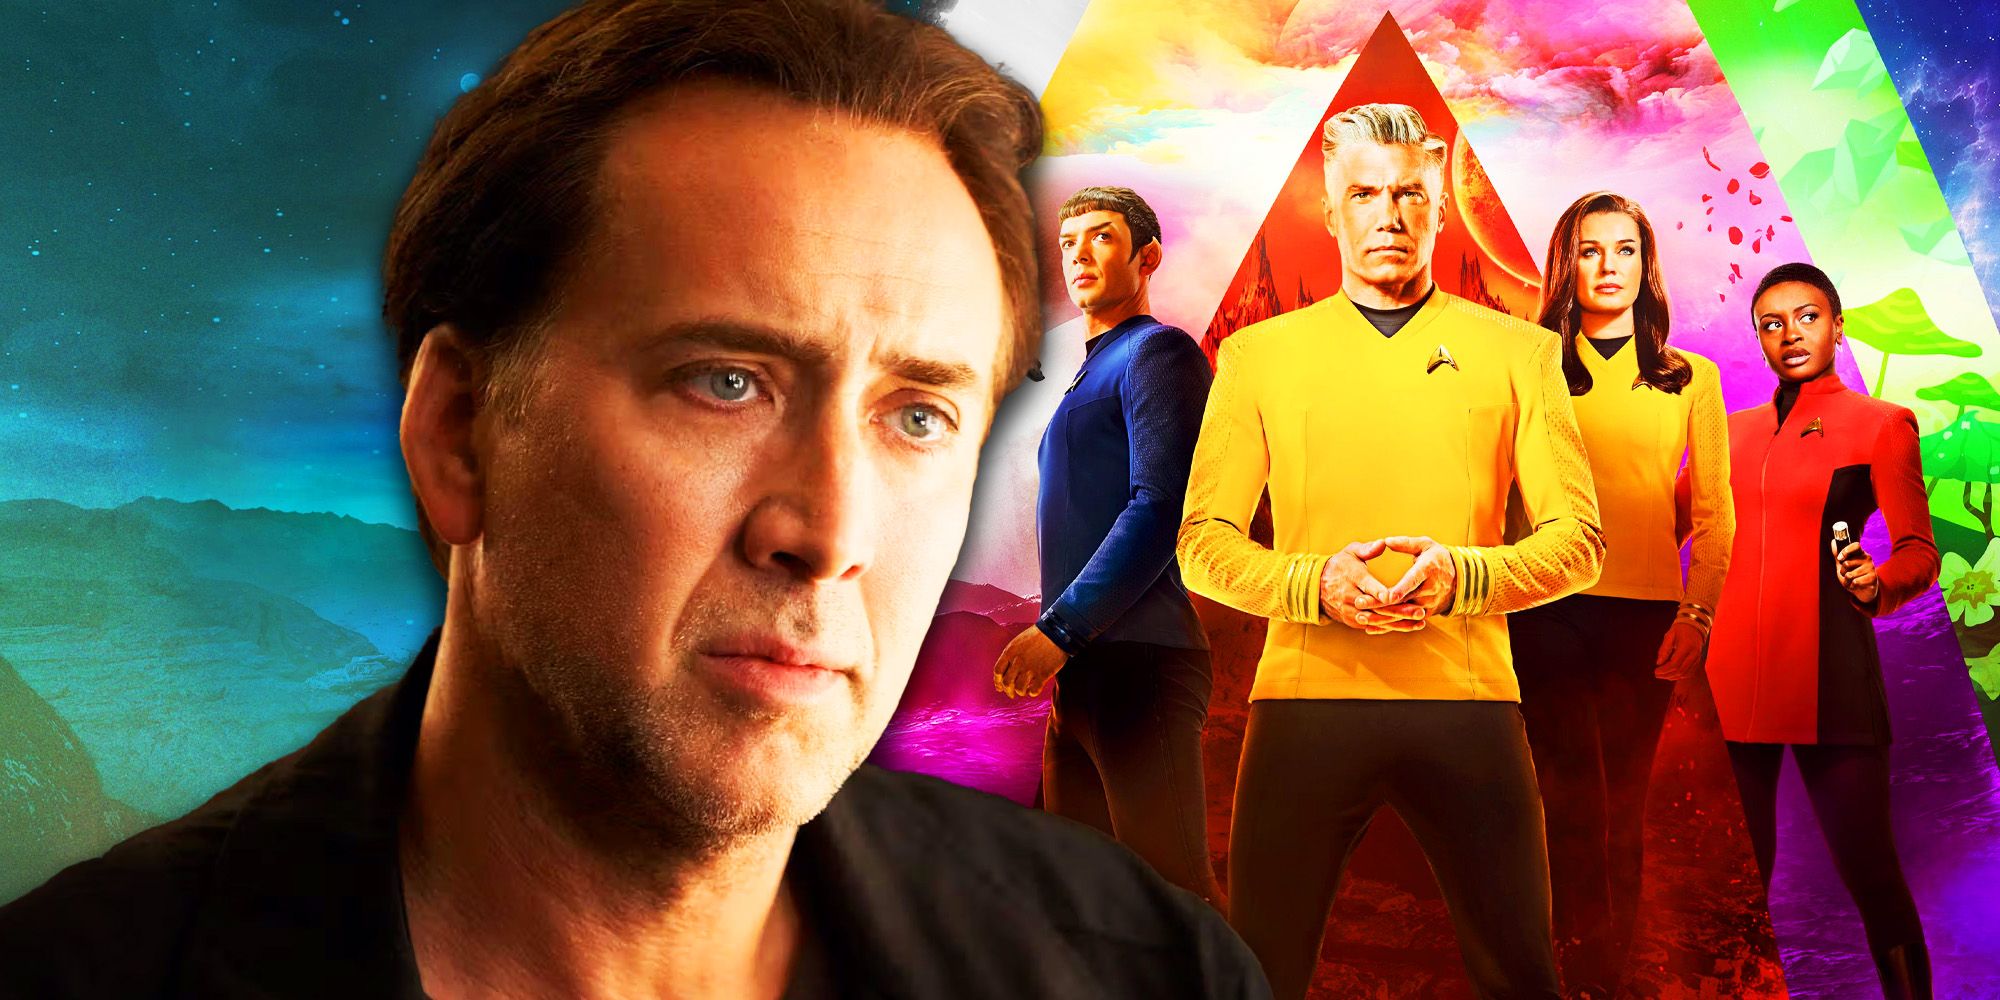 Nicolas Cage with the cast from Star Trek Strange New Worlds